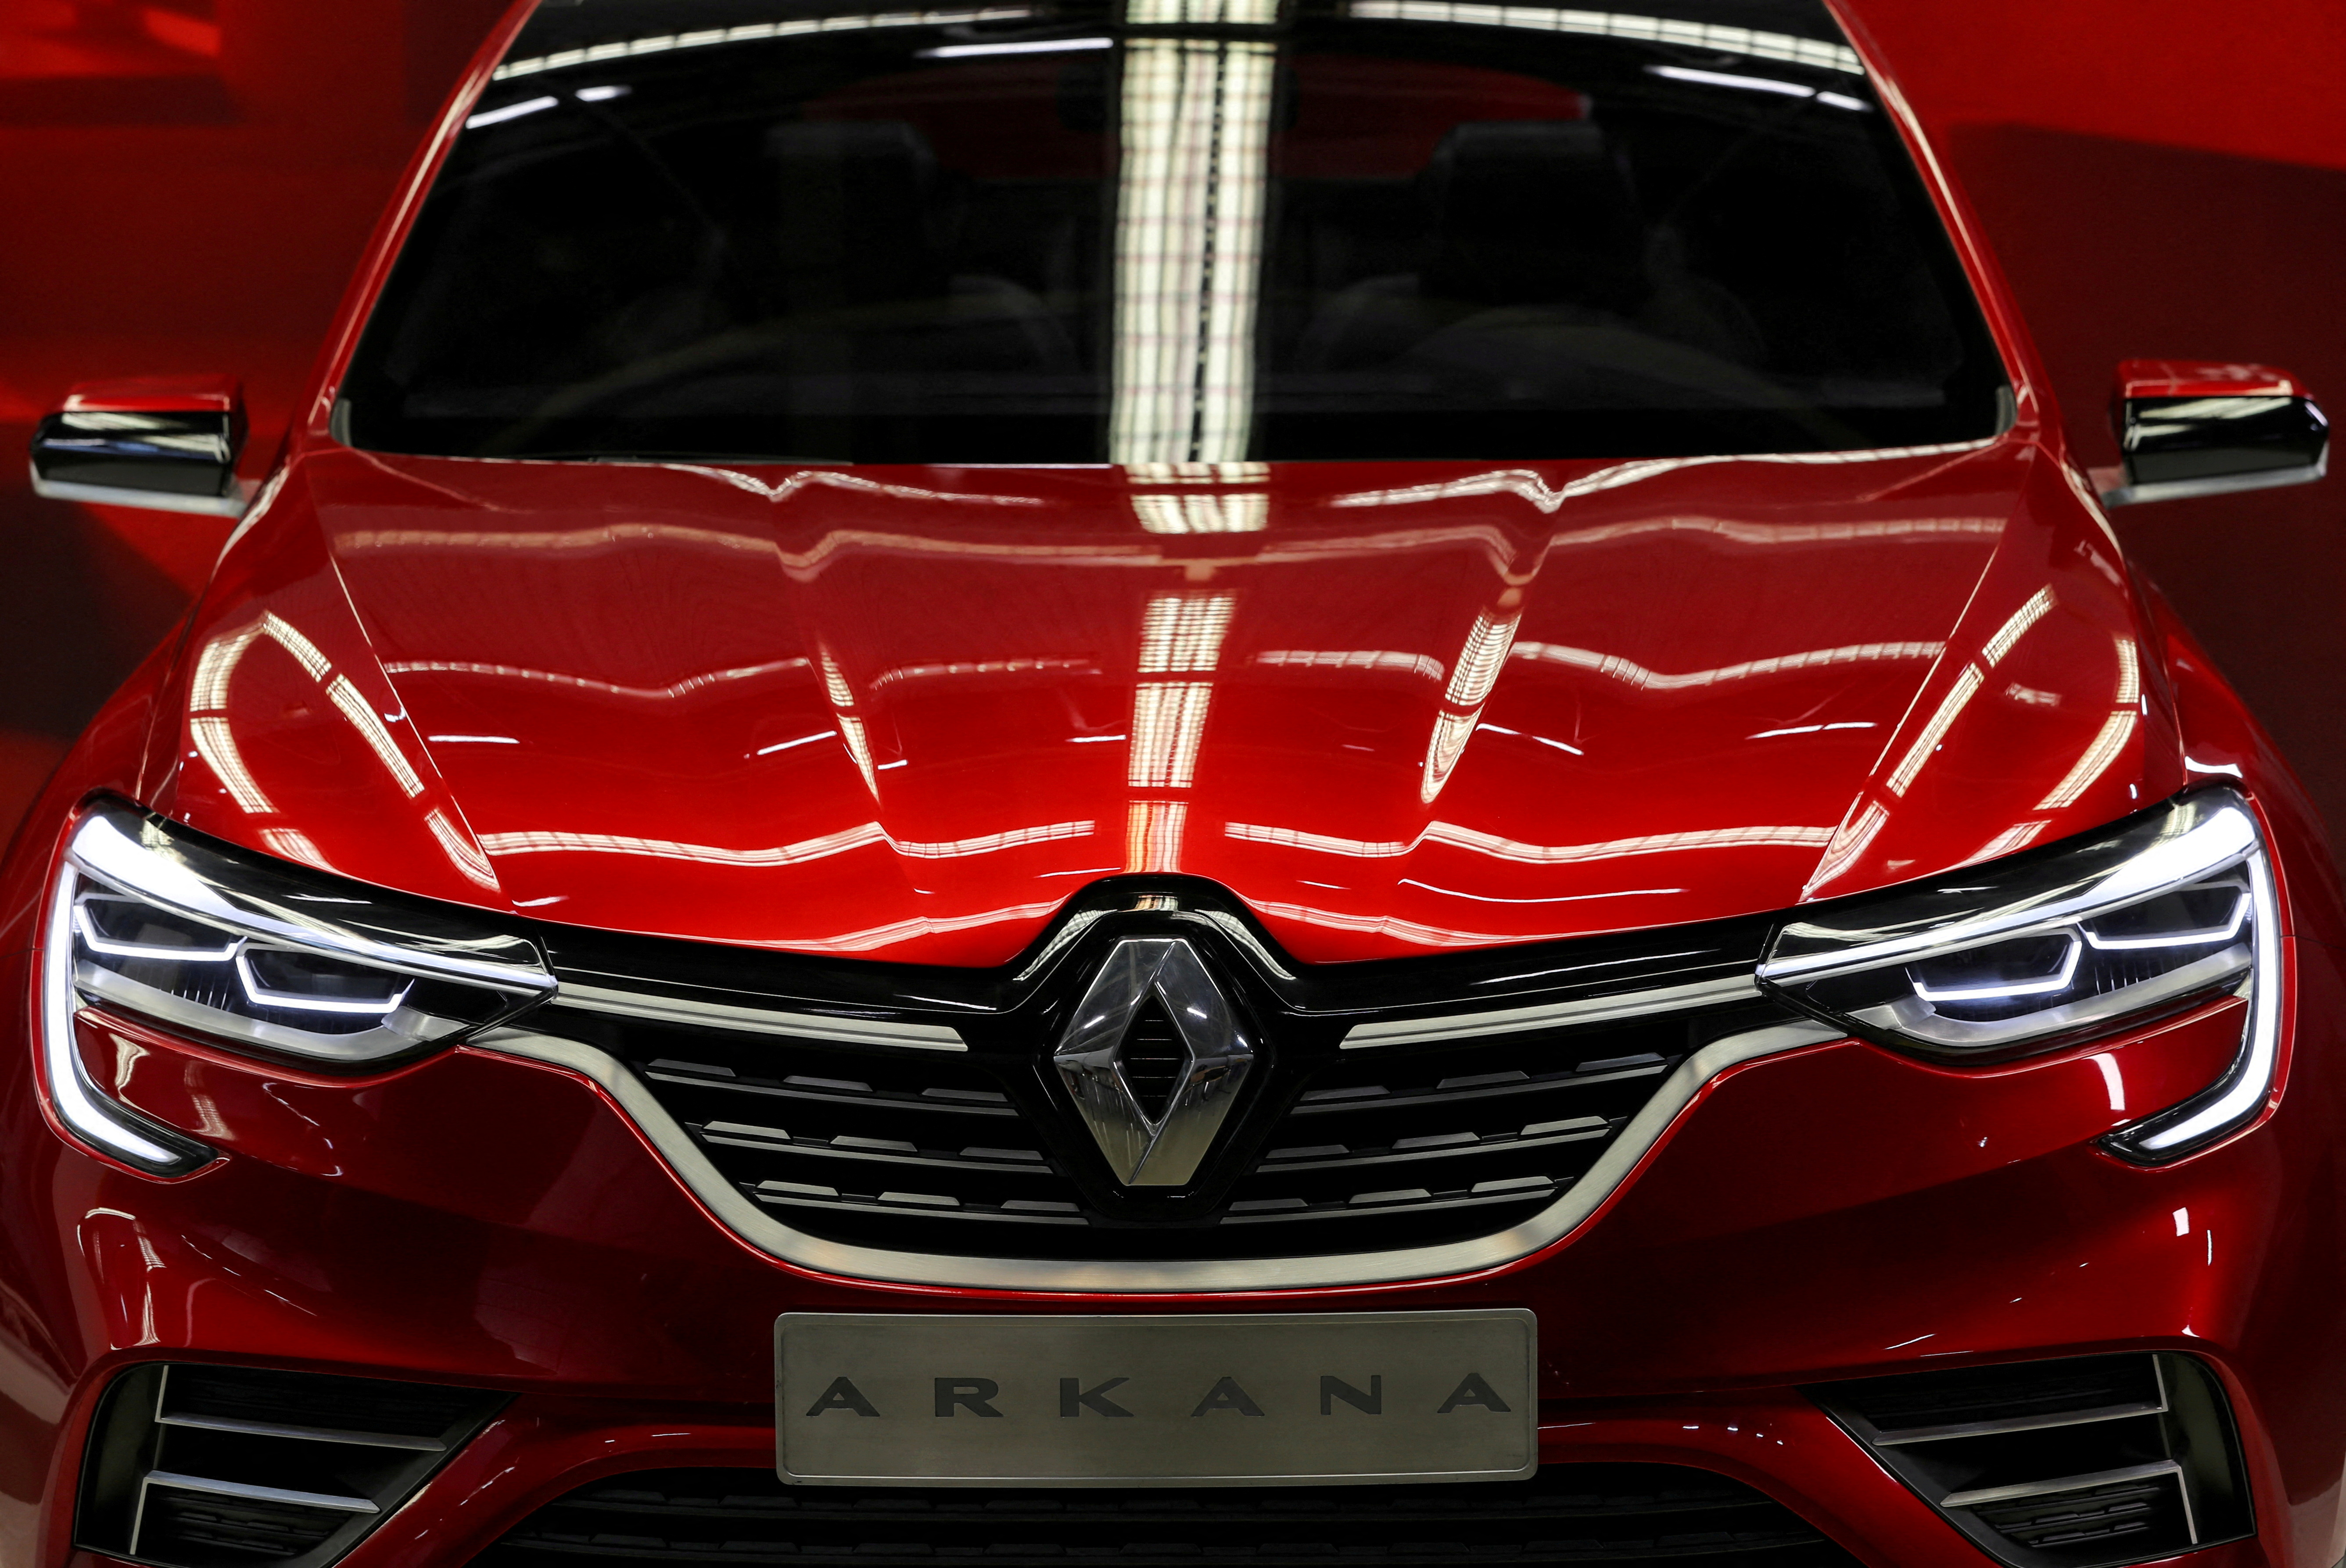 New Renault Arkana mid-size crossover is seen in a show room at Renault factory in Moscow